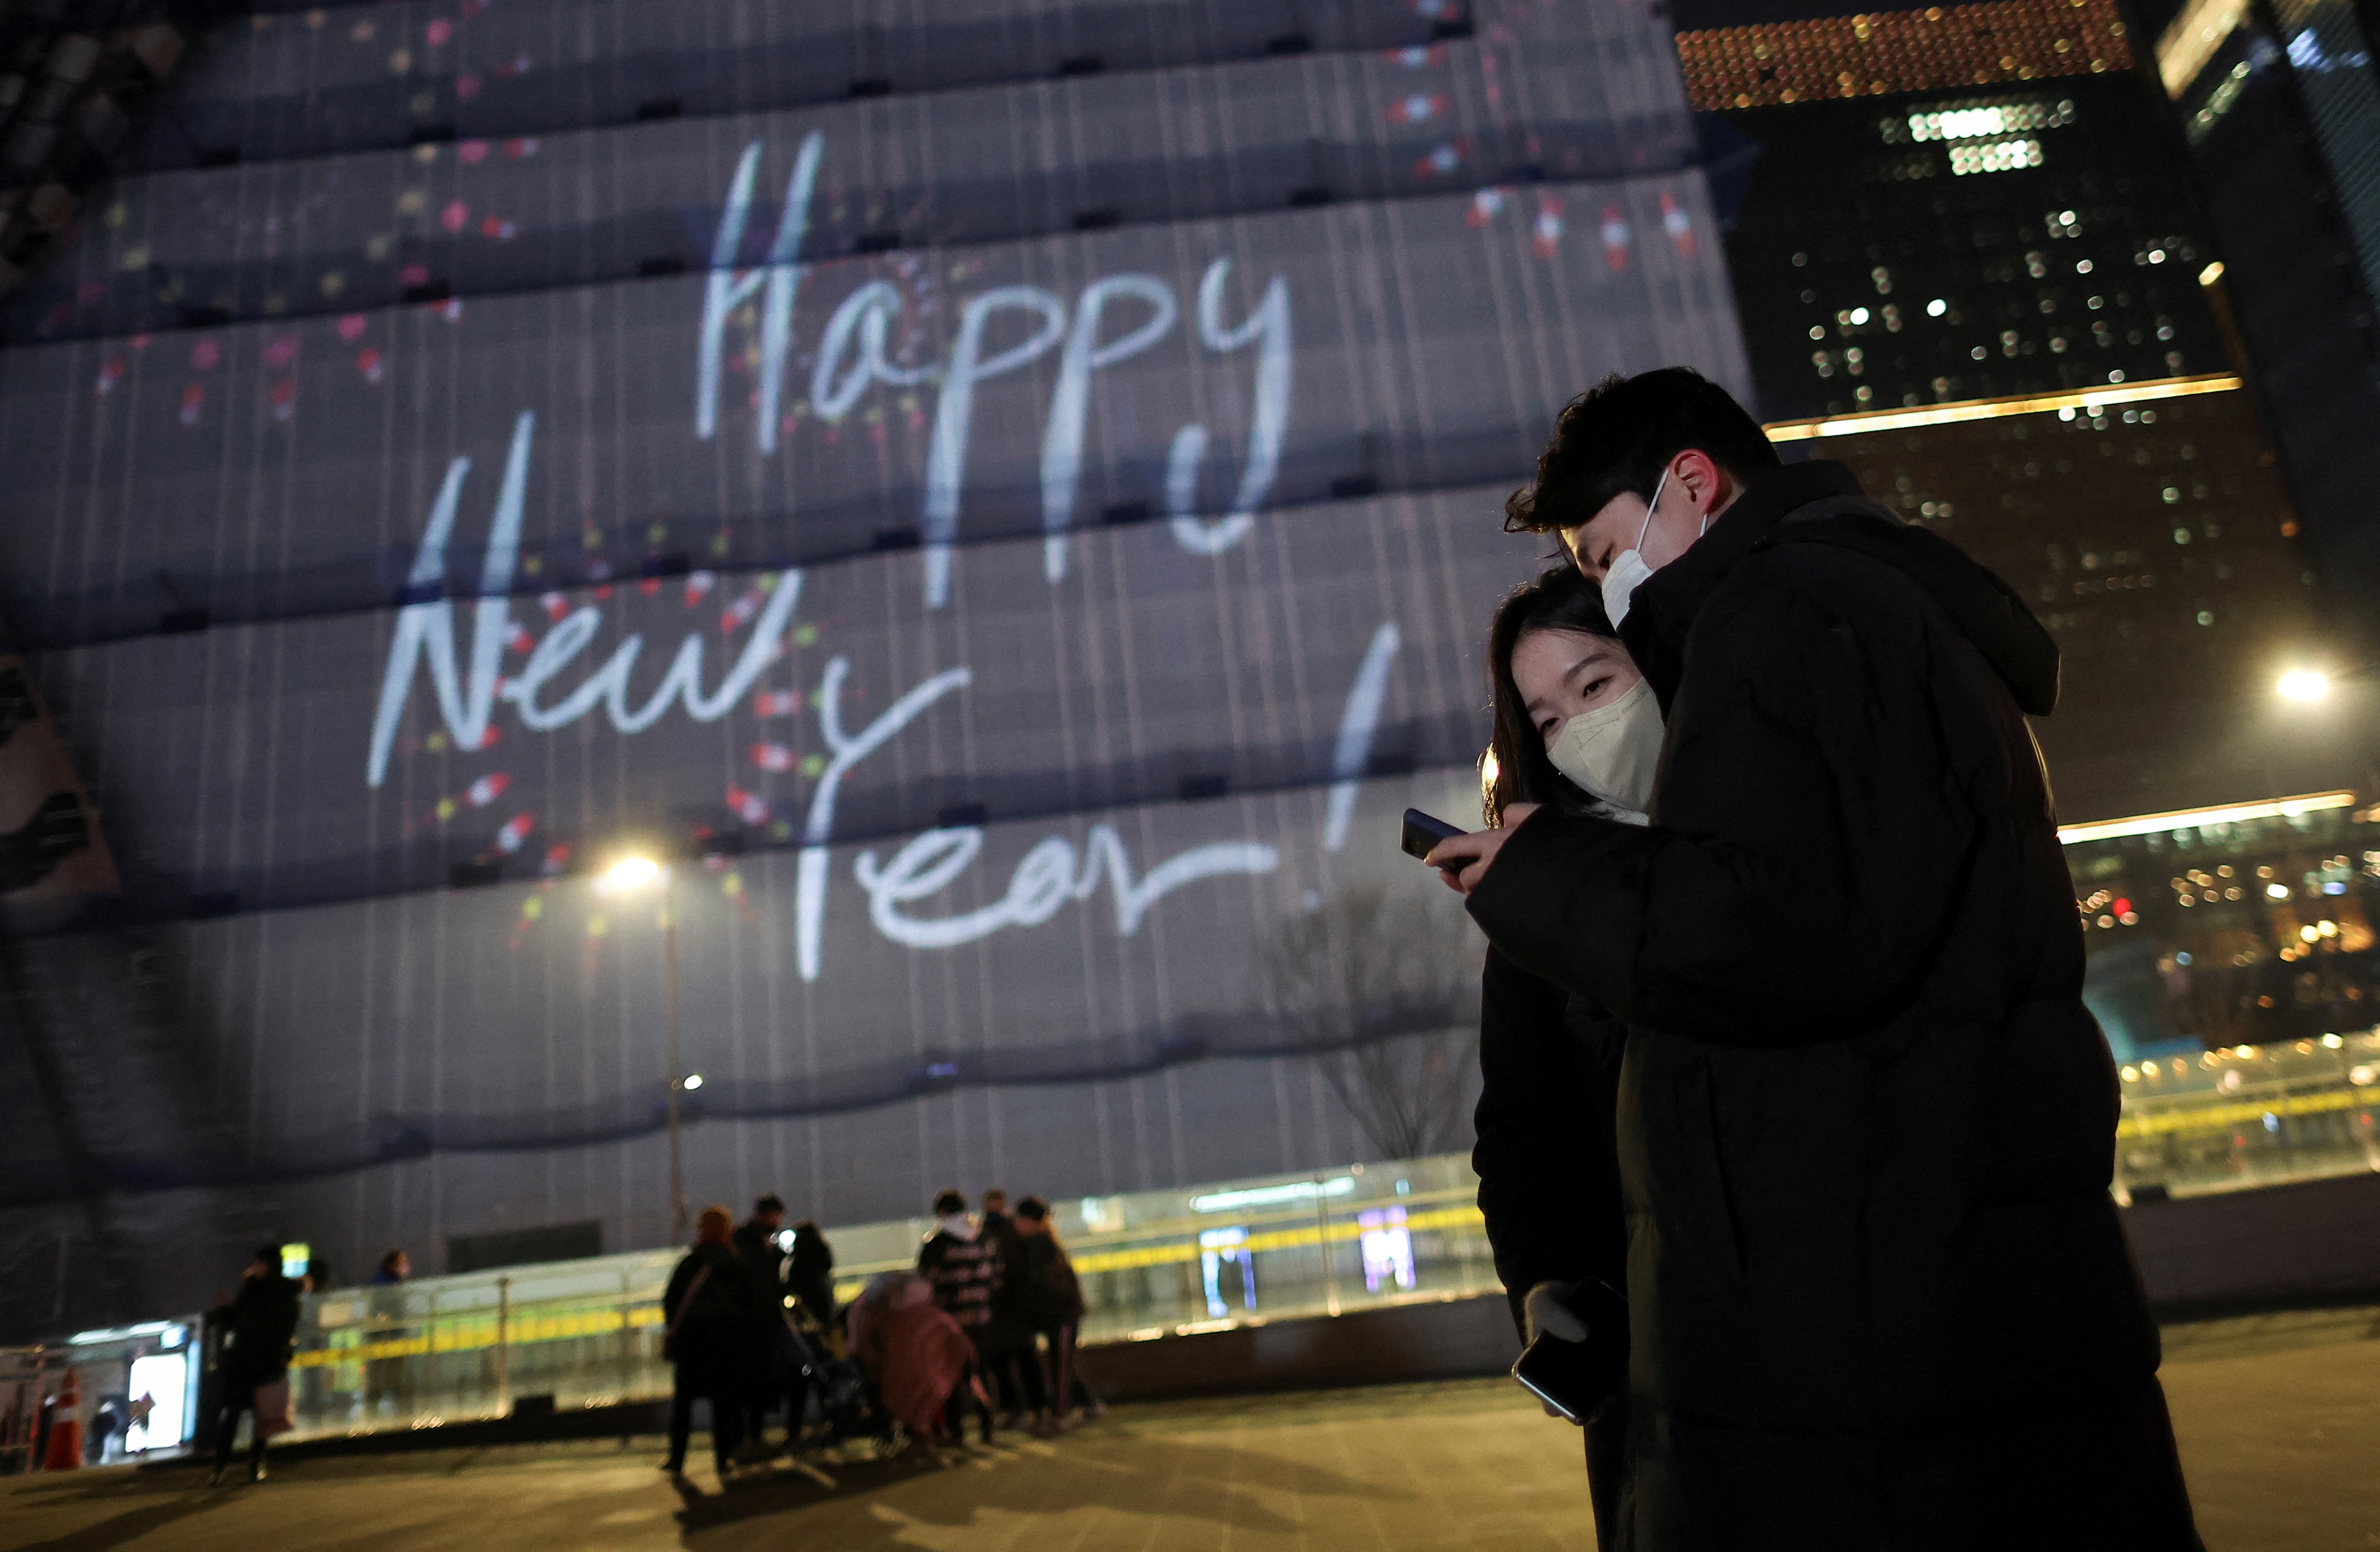 People celebrate New Year's eve in central Seoul, South Korea. (Reuters)